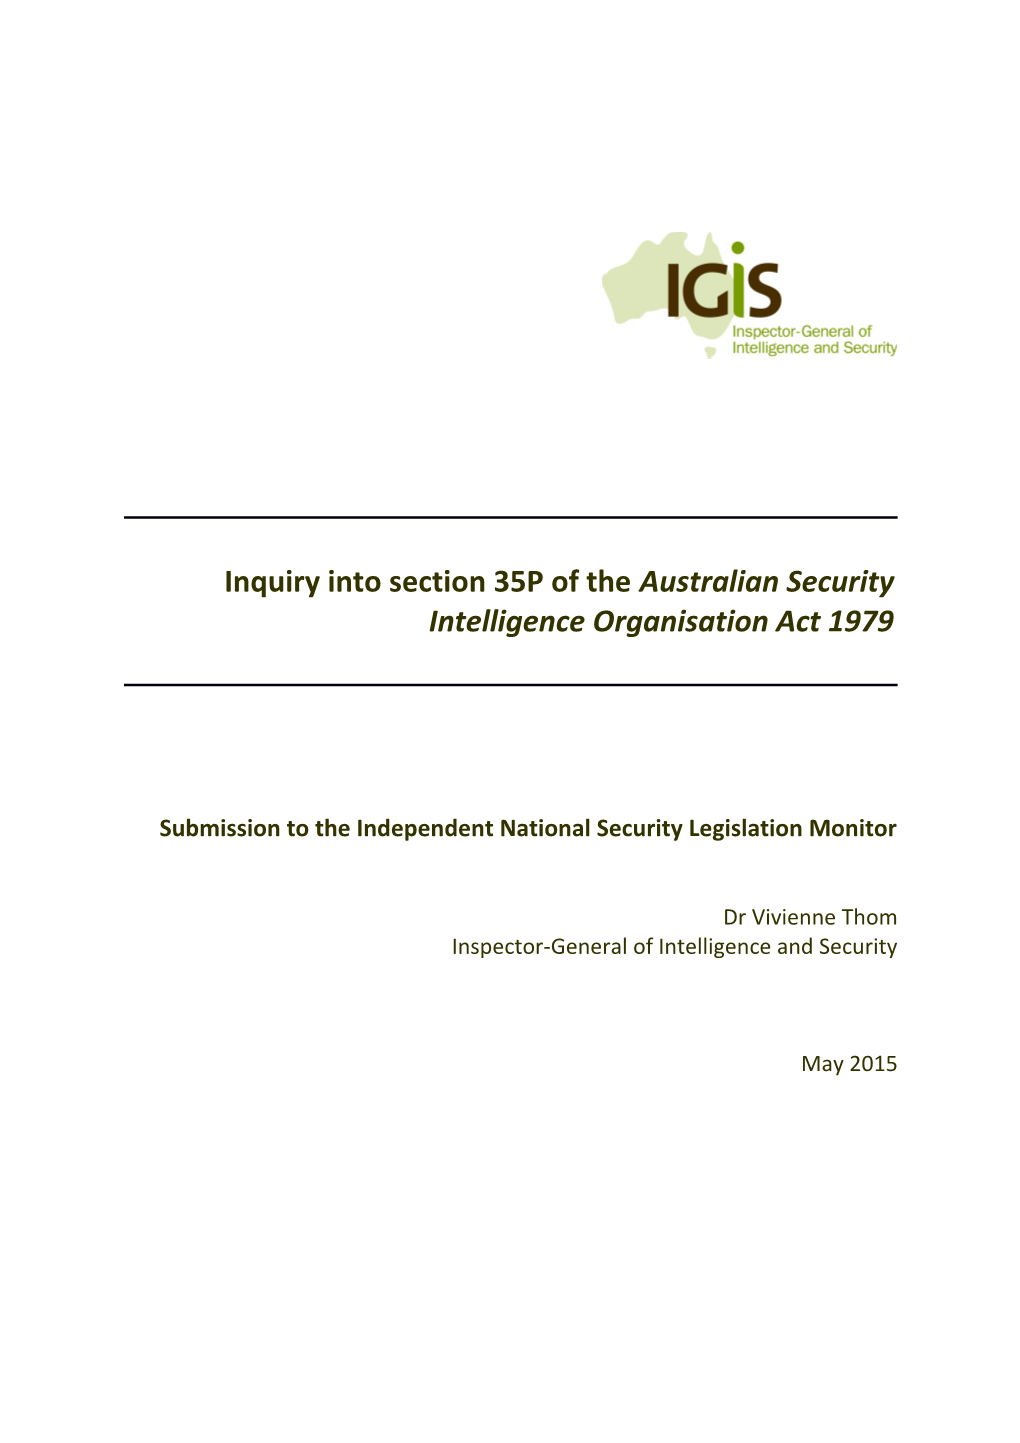 Inquiry Into Section 35P of the Australian Security Intelligence Organisation Act 1979